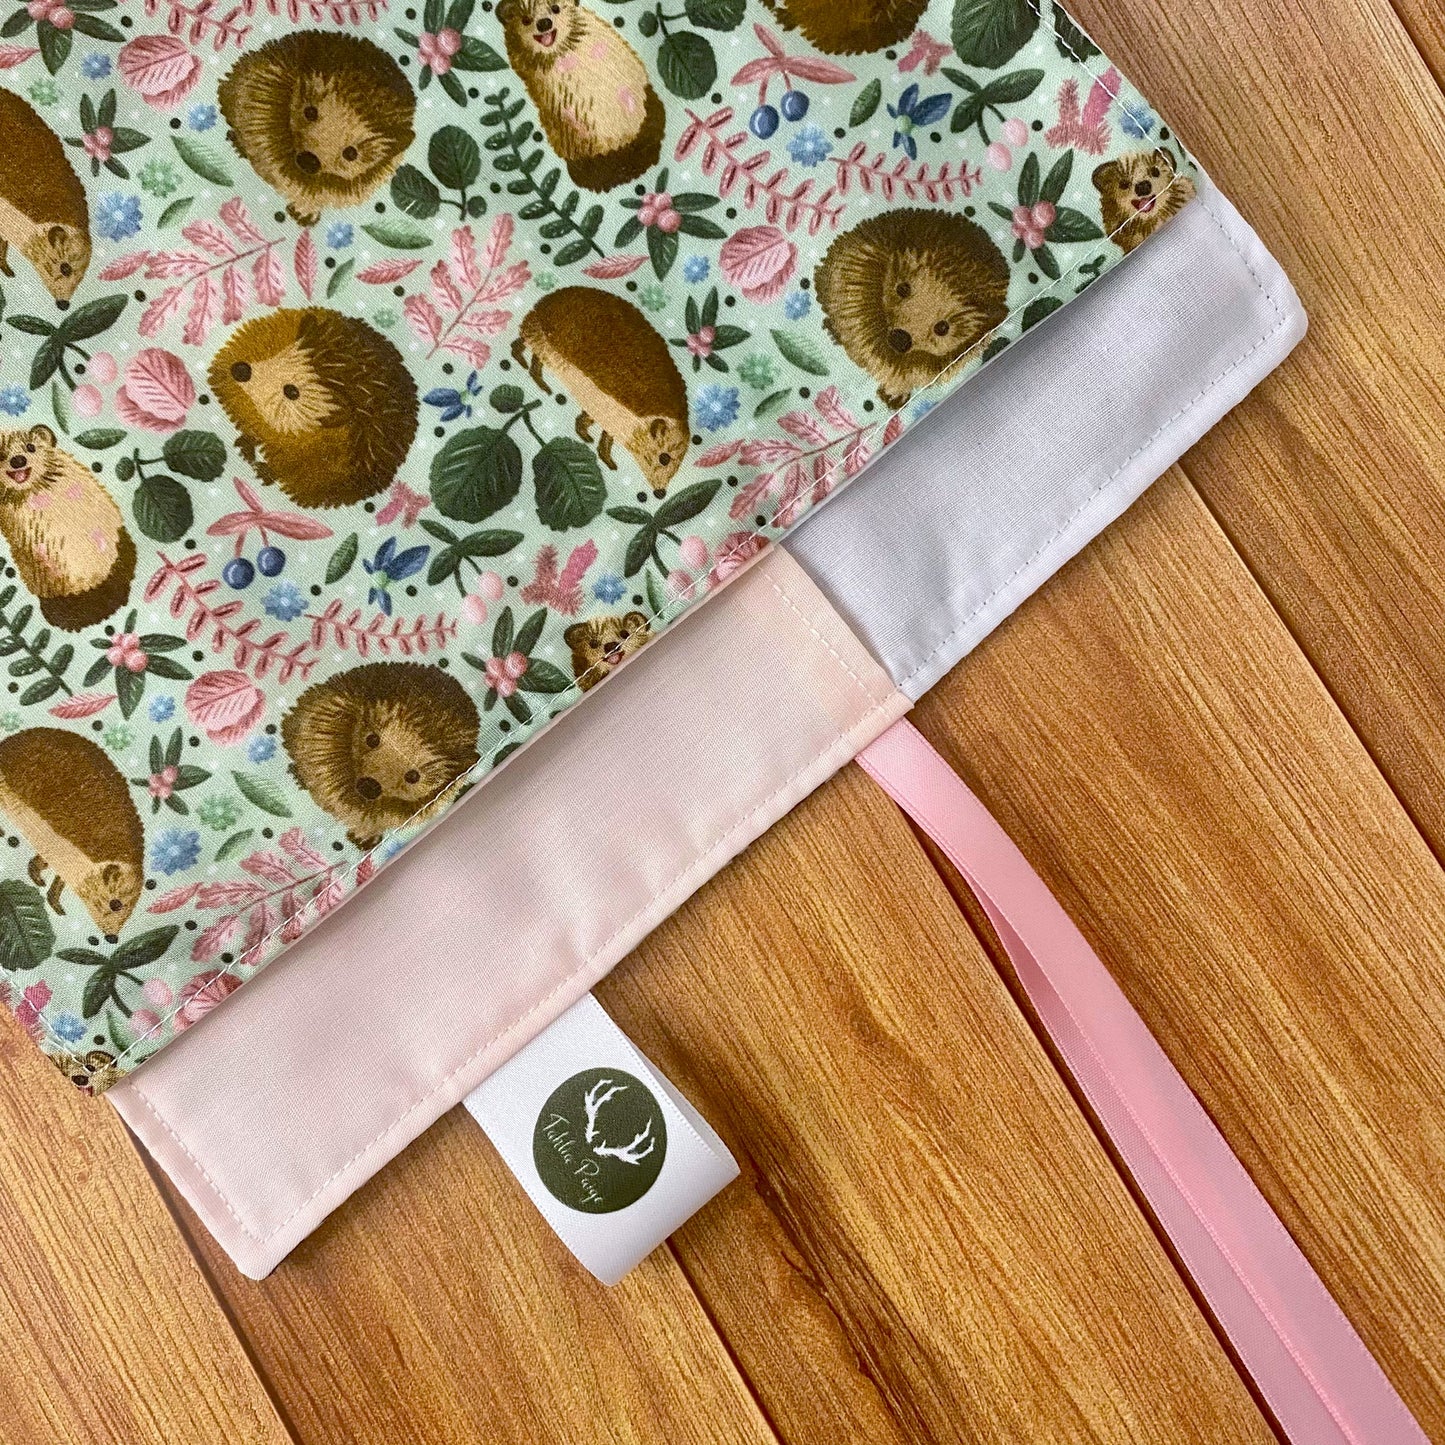 An ideal hedgehog gift for a hedgehog lover, this closeup shows the hedgehog pattern of the roll up brush roll and the ribbon to close it.